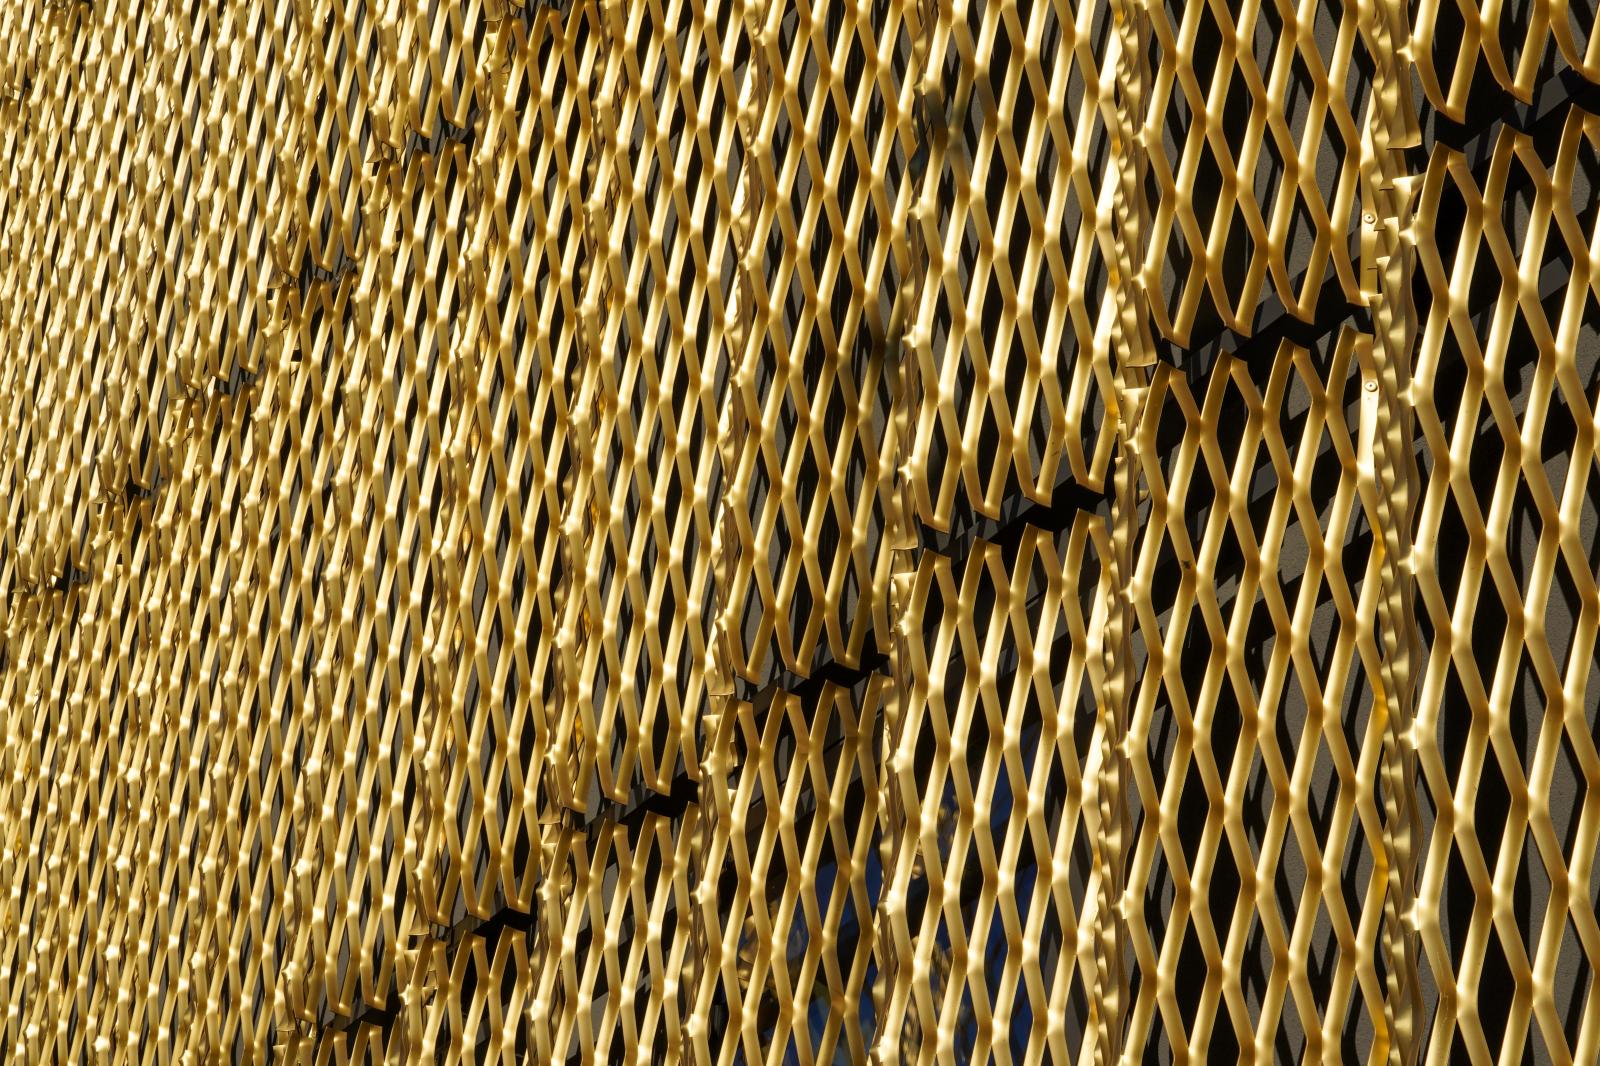 Geometric Glimmer: Golden Weave of Modernity | Buy this image